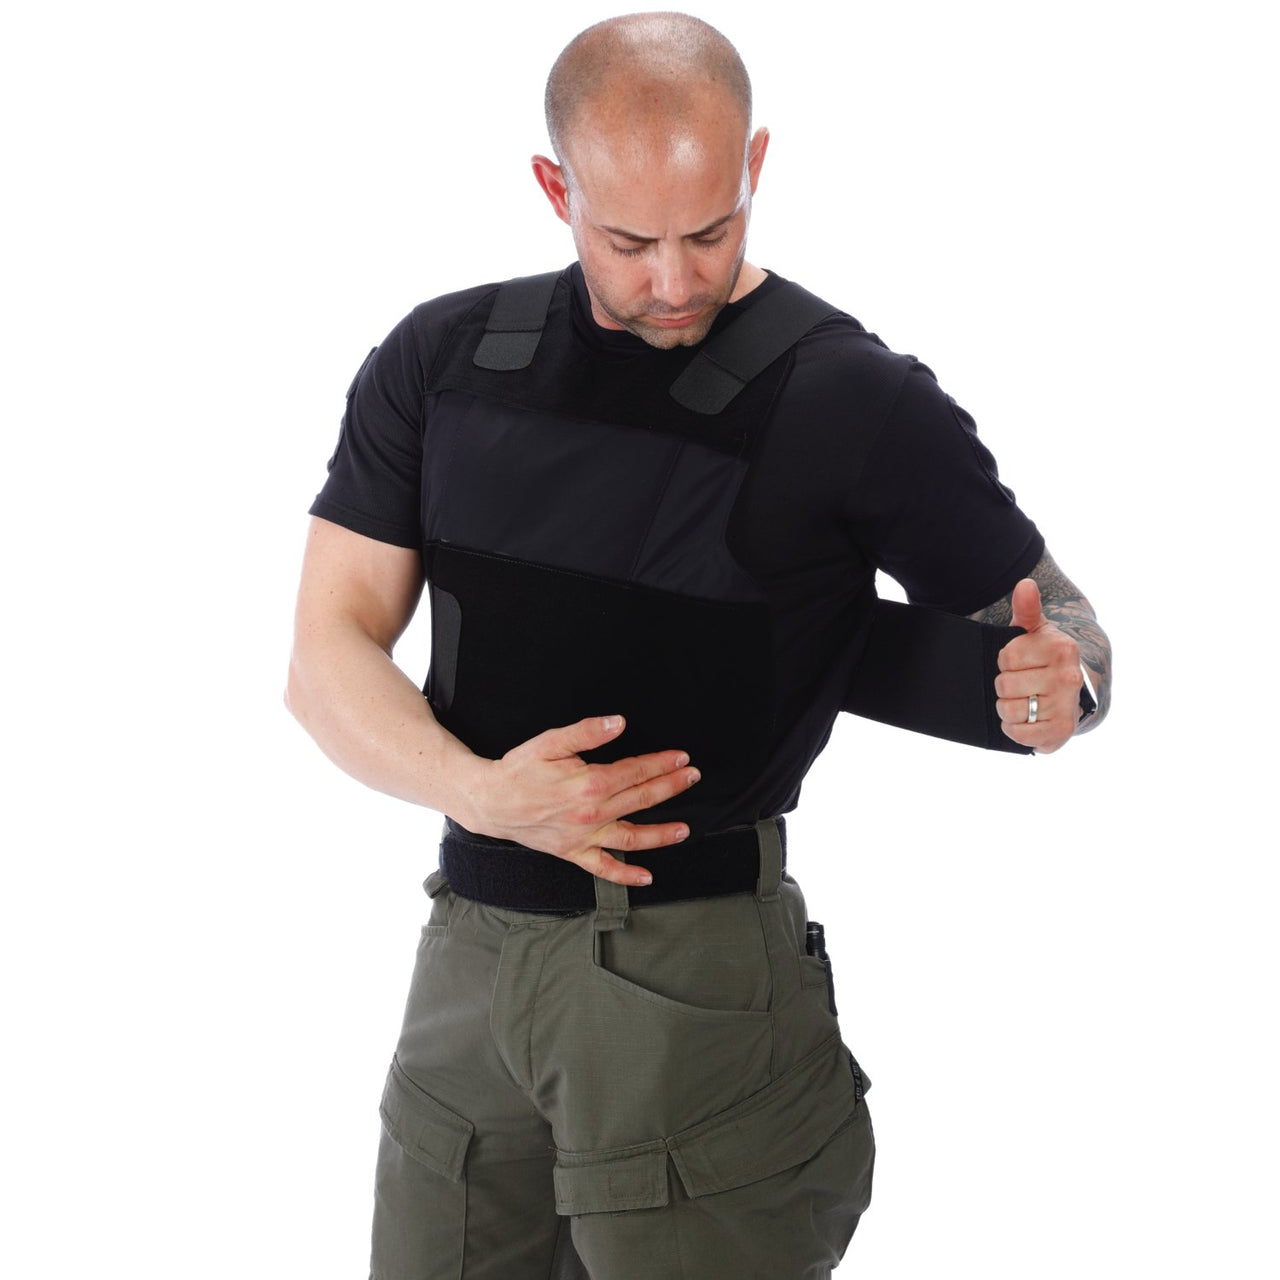 A man in a green shirt is putting his hand on his Body Armor Direct All American Concealable Enhanced Multi-Threat Vest.